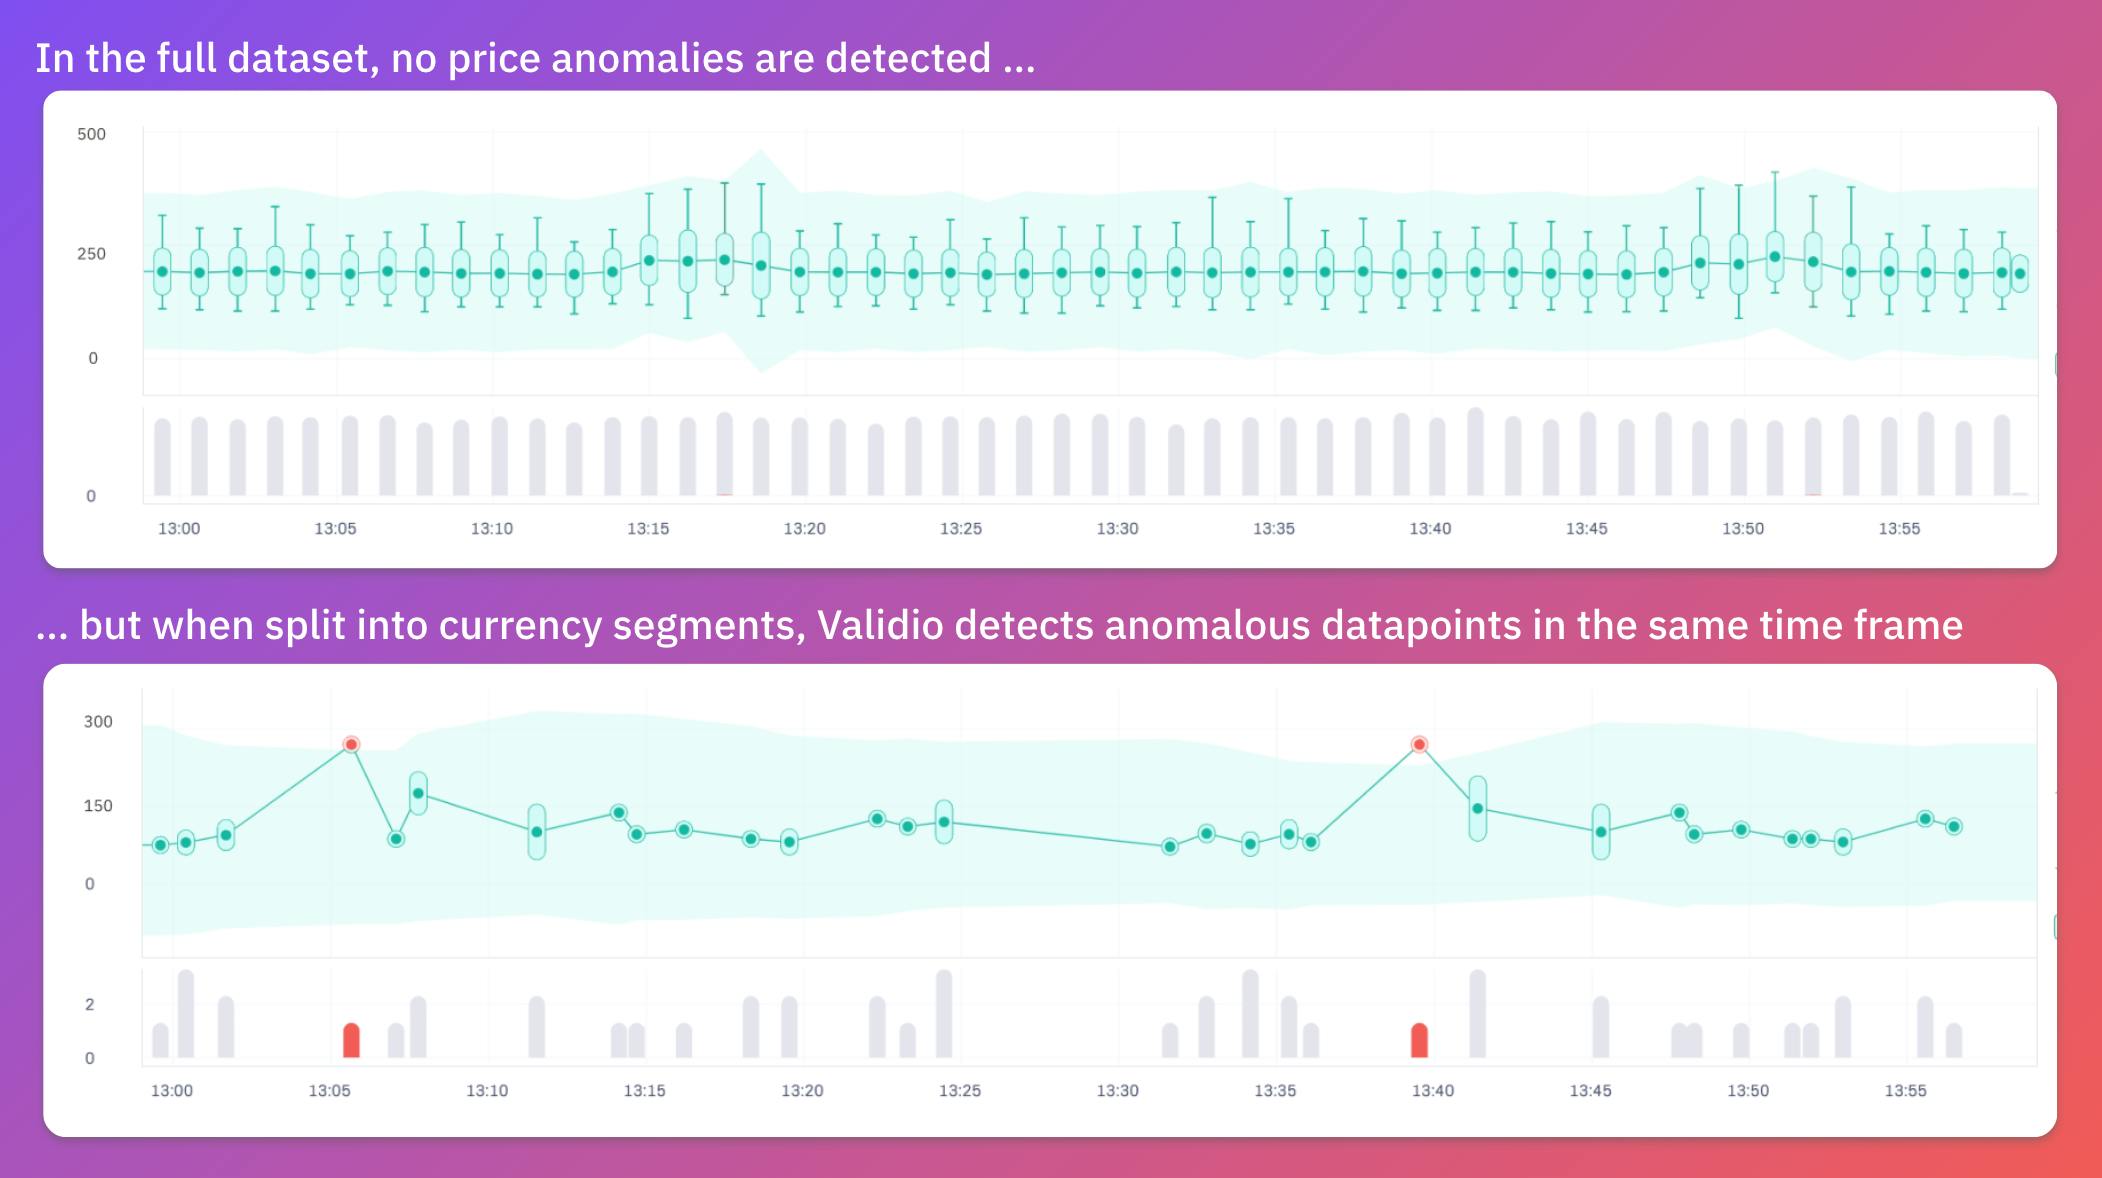 By splitting price into currency segments, Validio detects two anomalies in the DKK segment while the same datapoints are considered normal range values in the complete set. Grace investigates the datapoints and discovers they were attributed incorrect currencies.